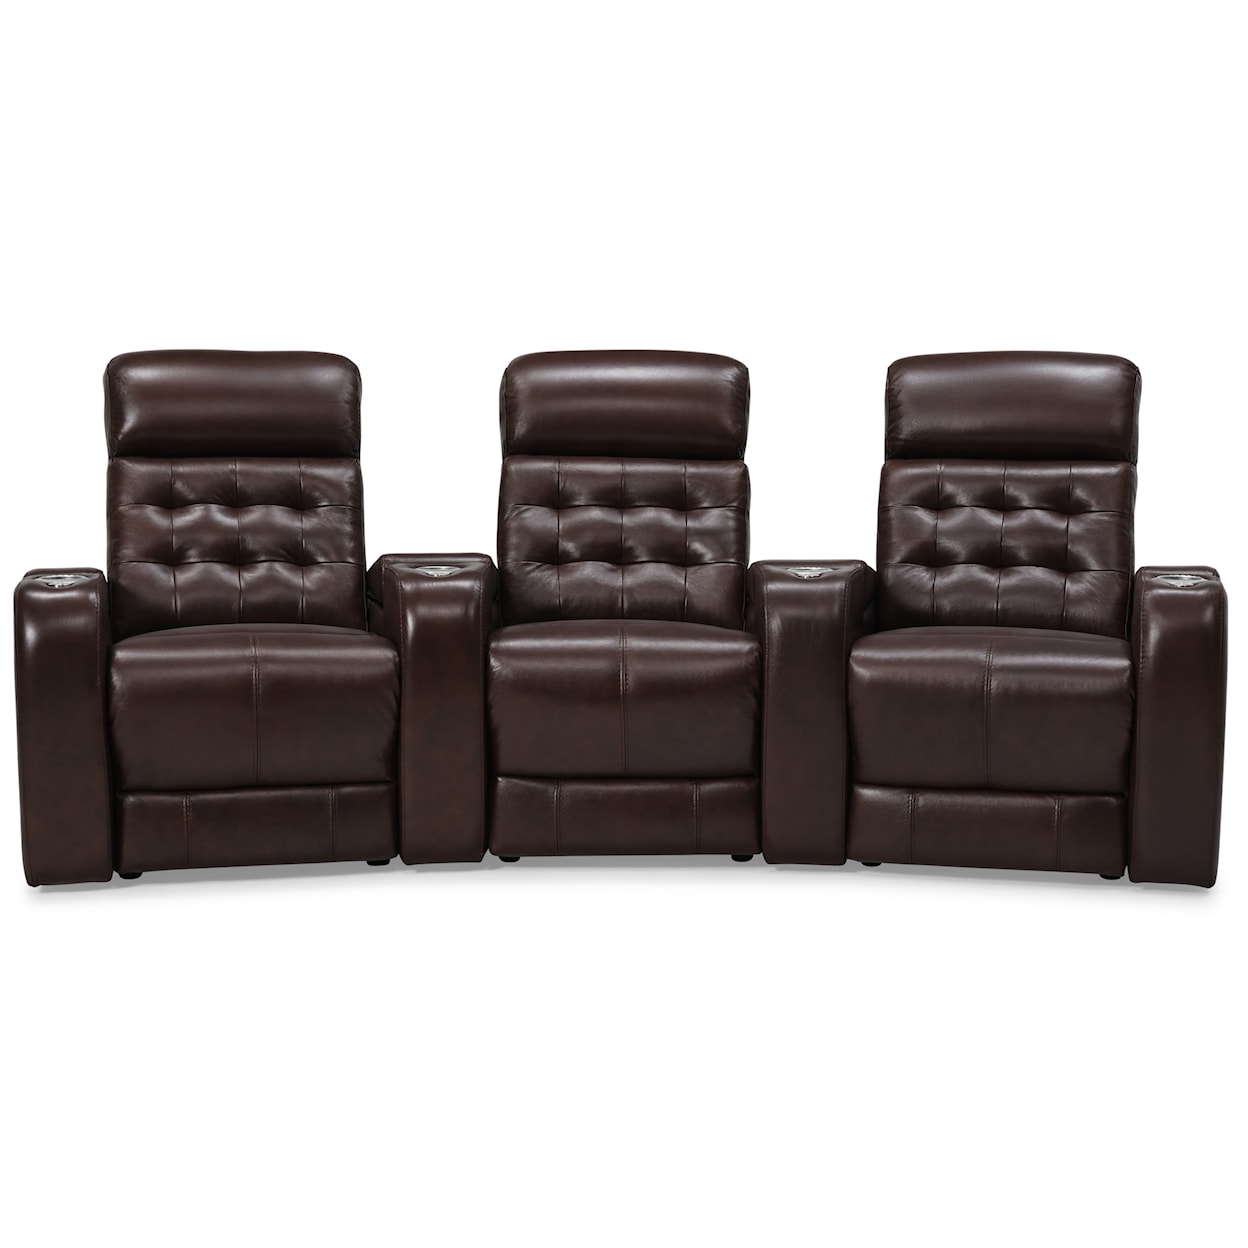 Palliser Erindale Leather Power Home Theater Sectional